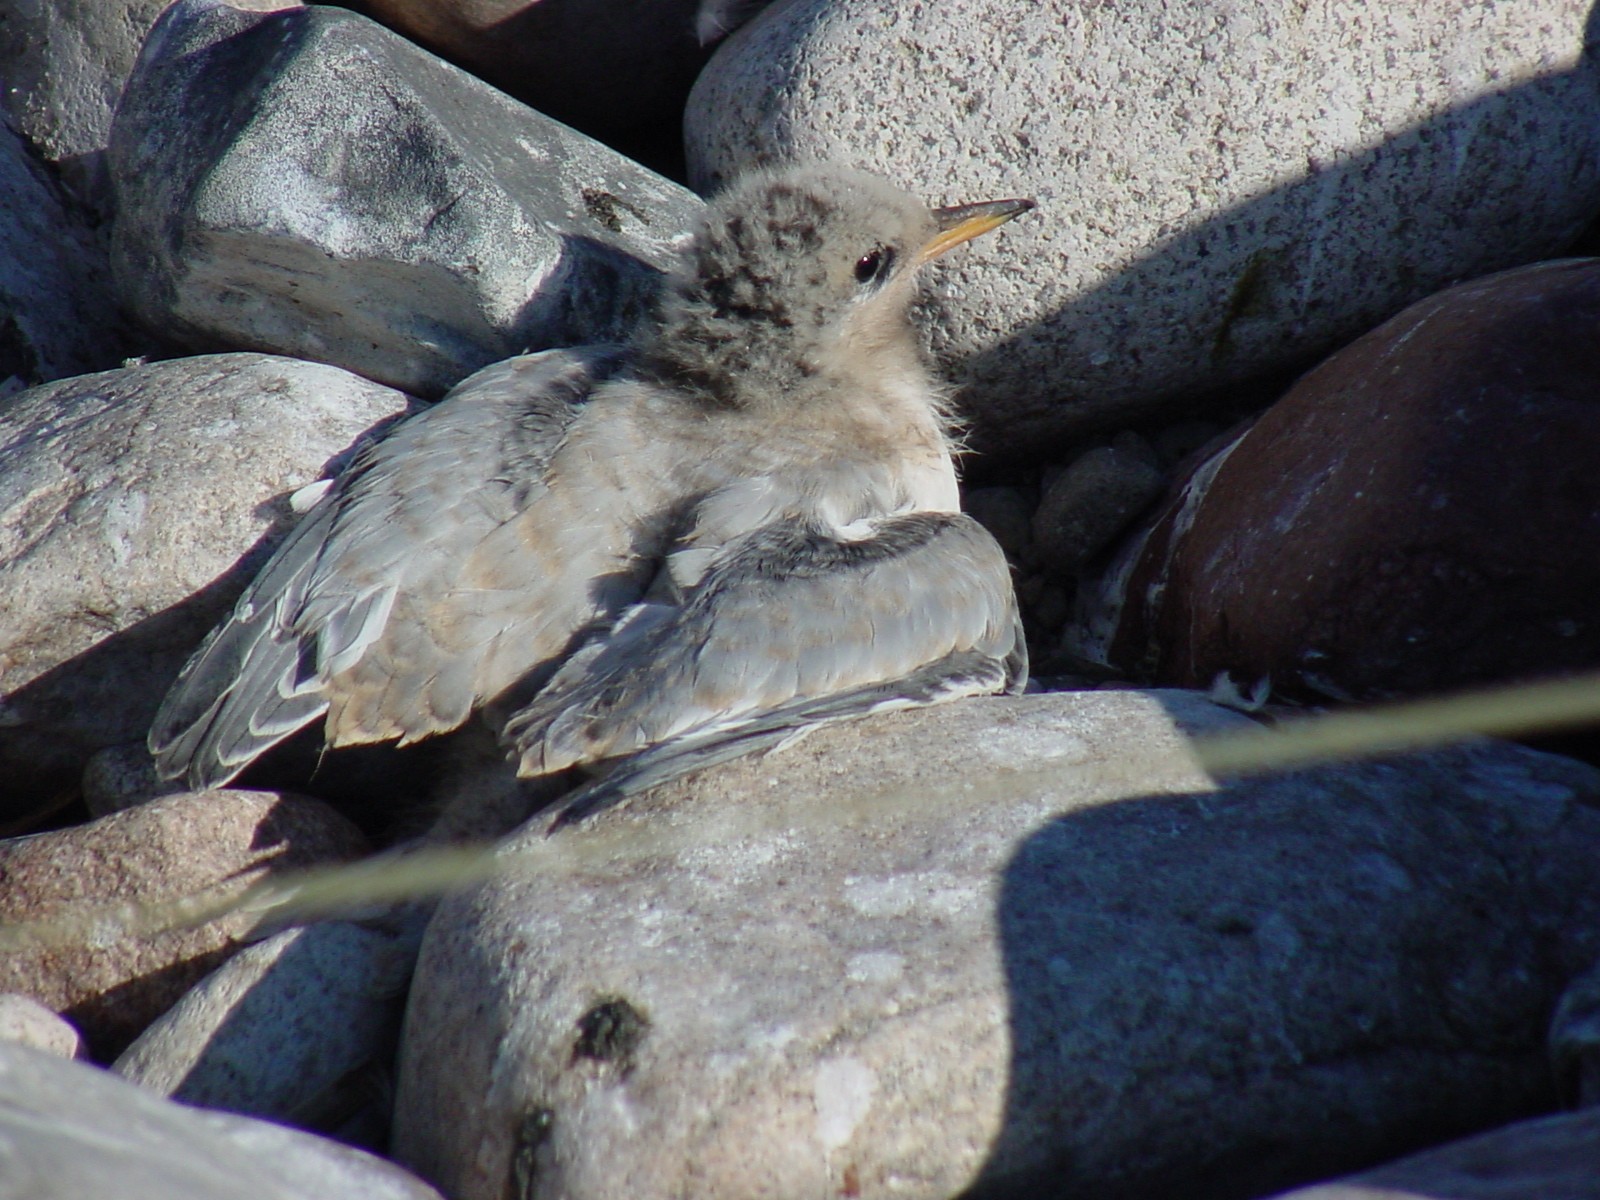 A Common Tern about 22 days old